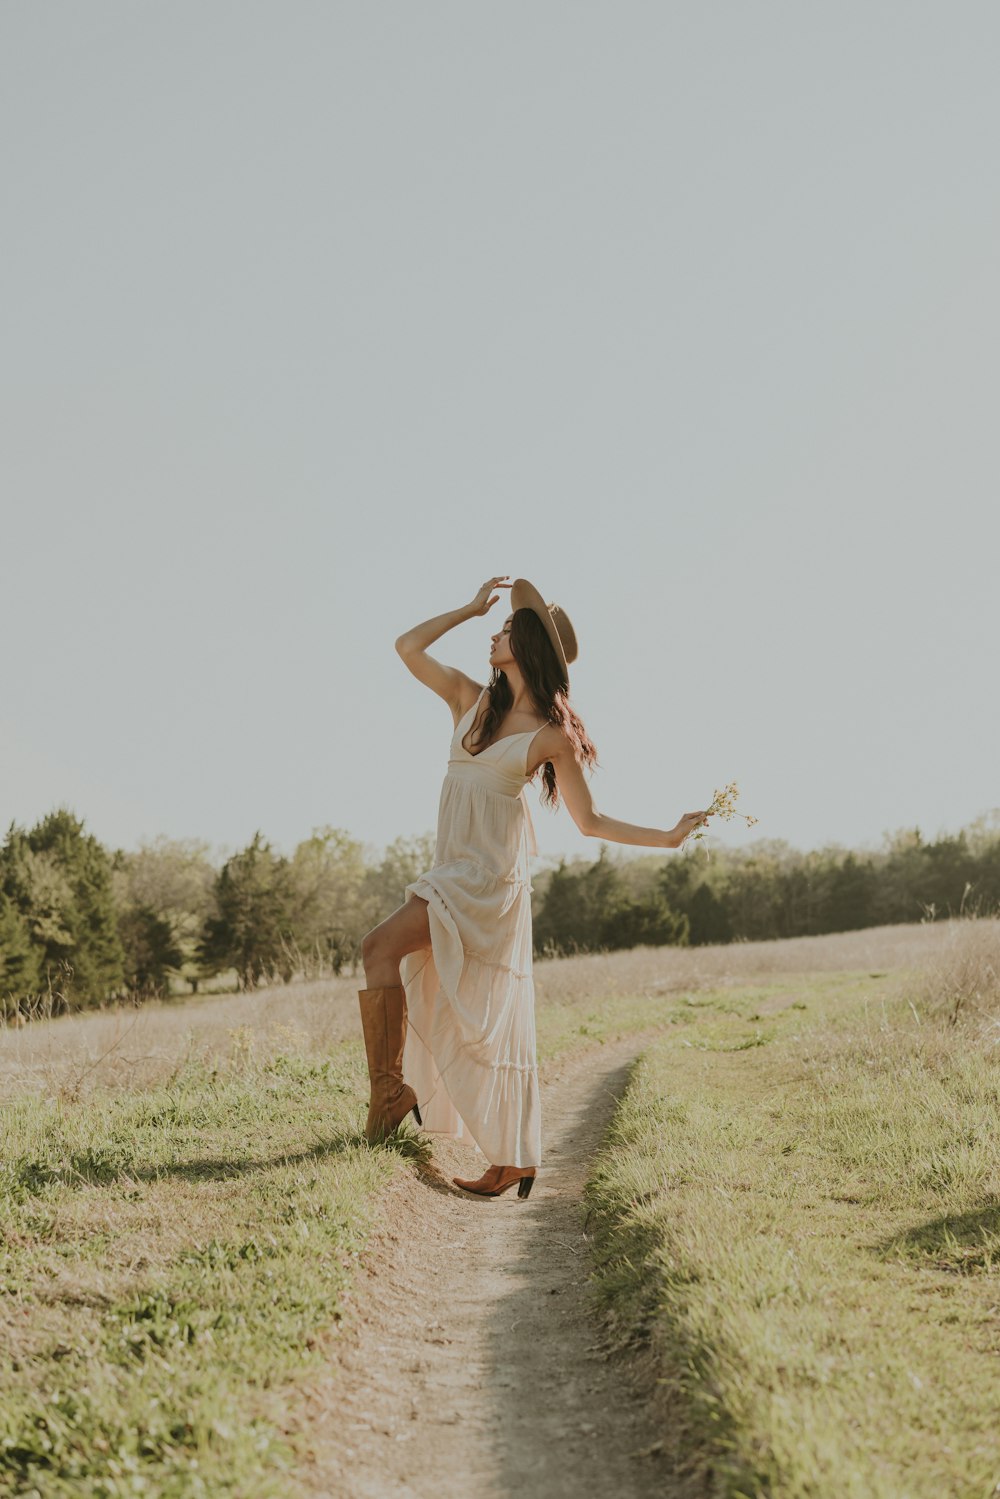 a woman in a white dress and cowboy hat dancing on a dirt road